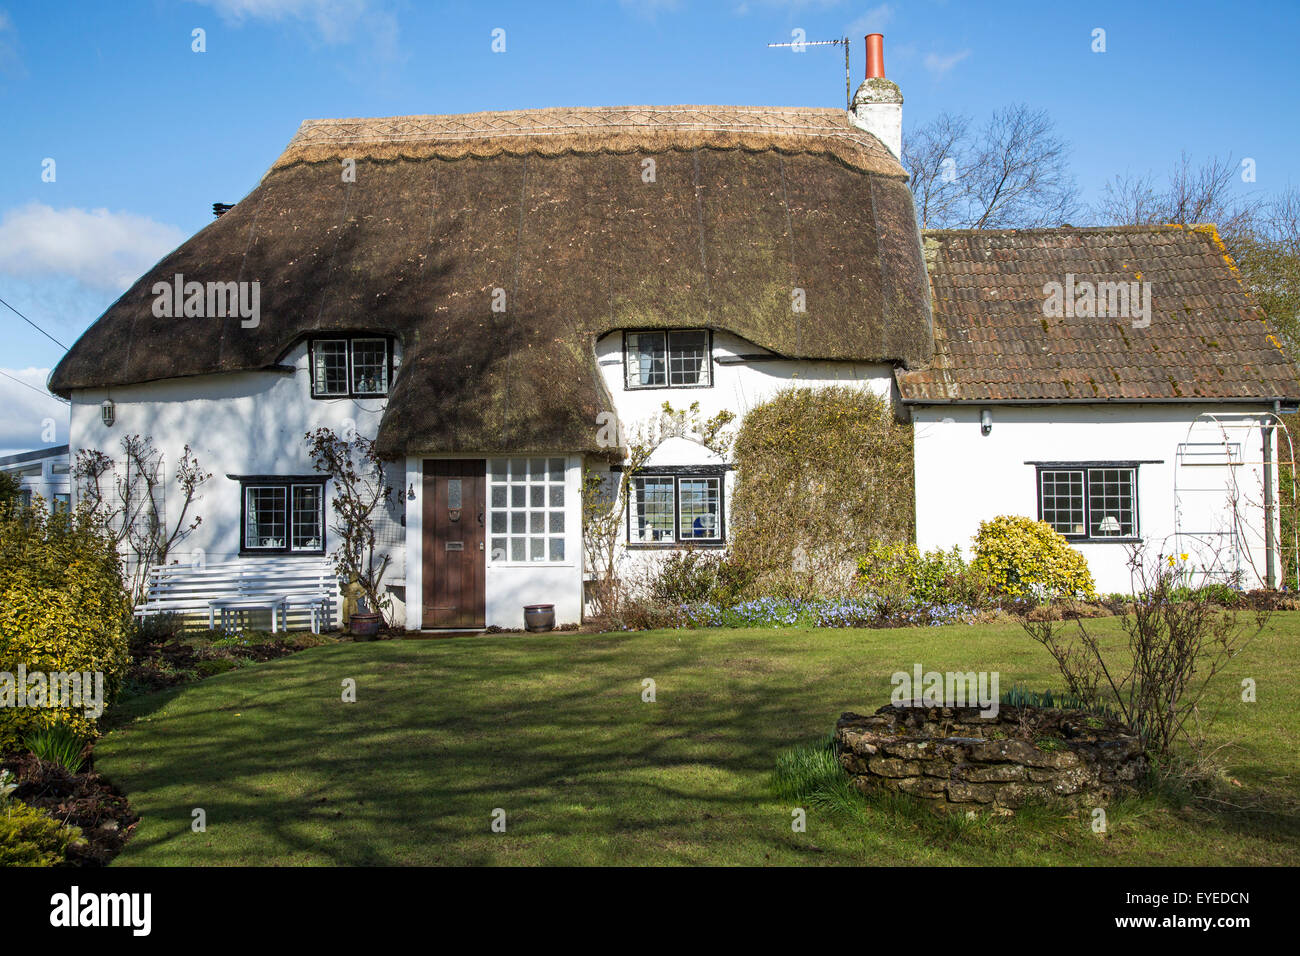 Pretty small detached country cottage, Cherhill, Wiltshire, England, UK Stock Photo